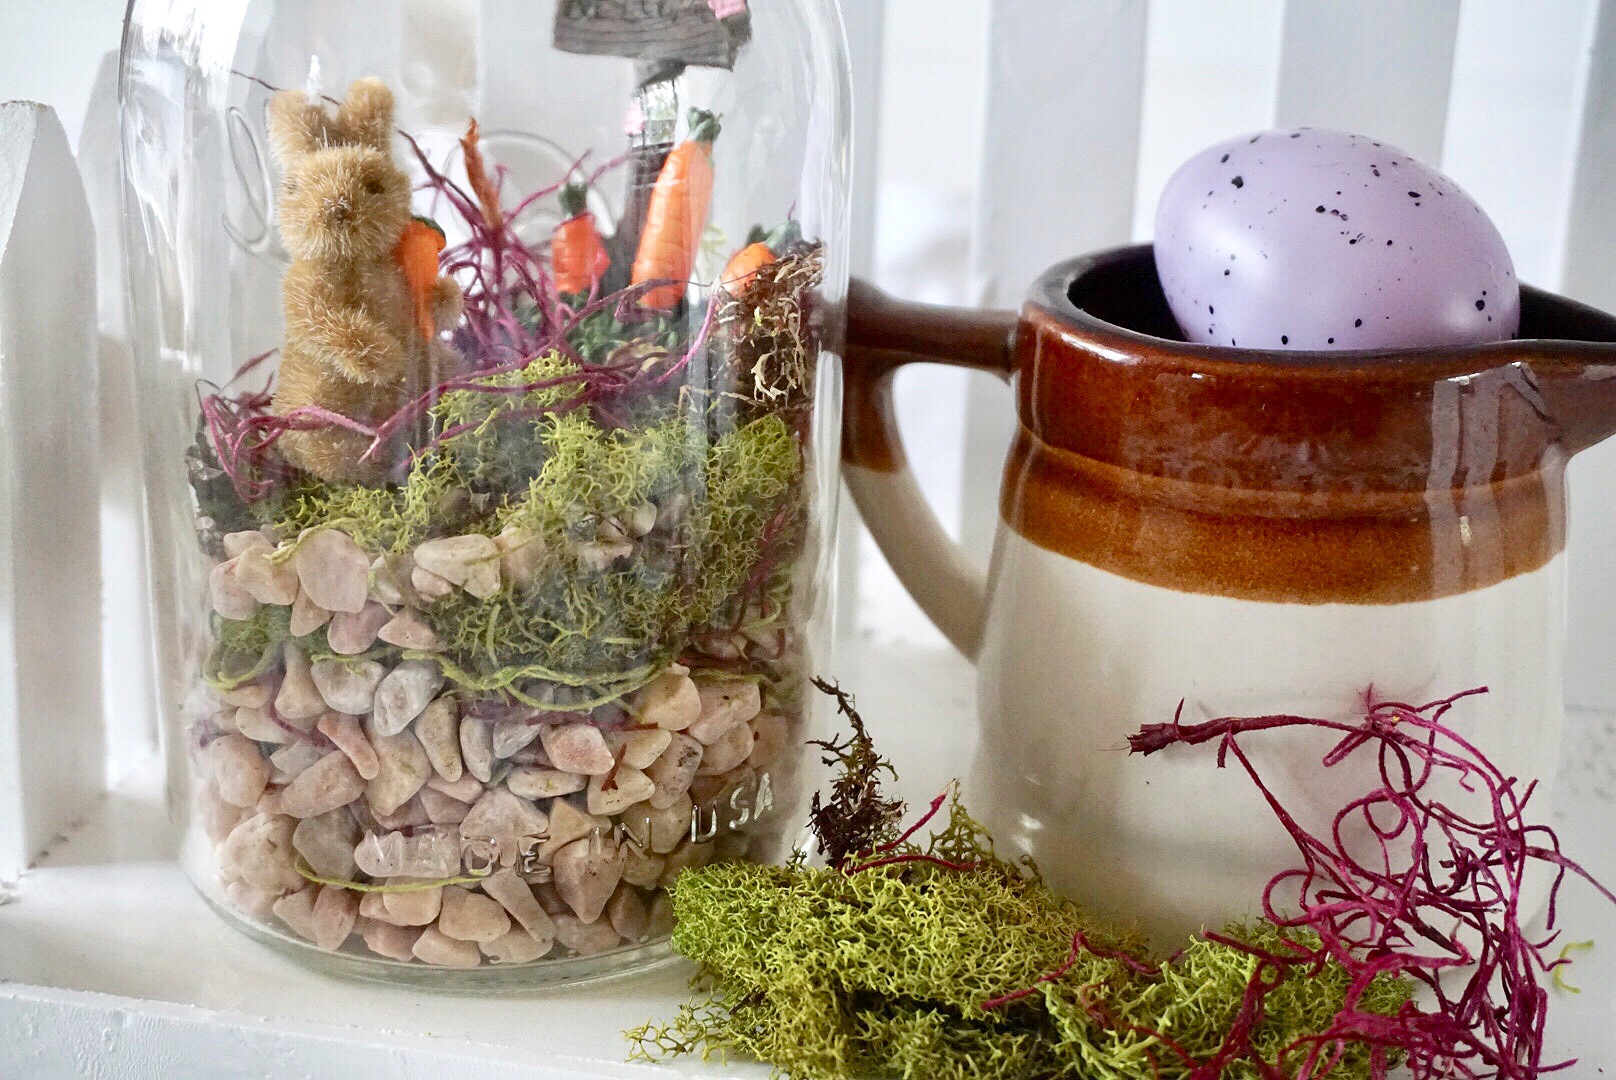  Easter themed fairy garden with bunny and carrot patch 